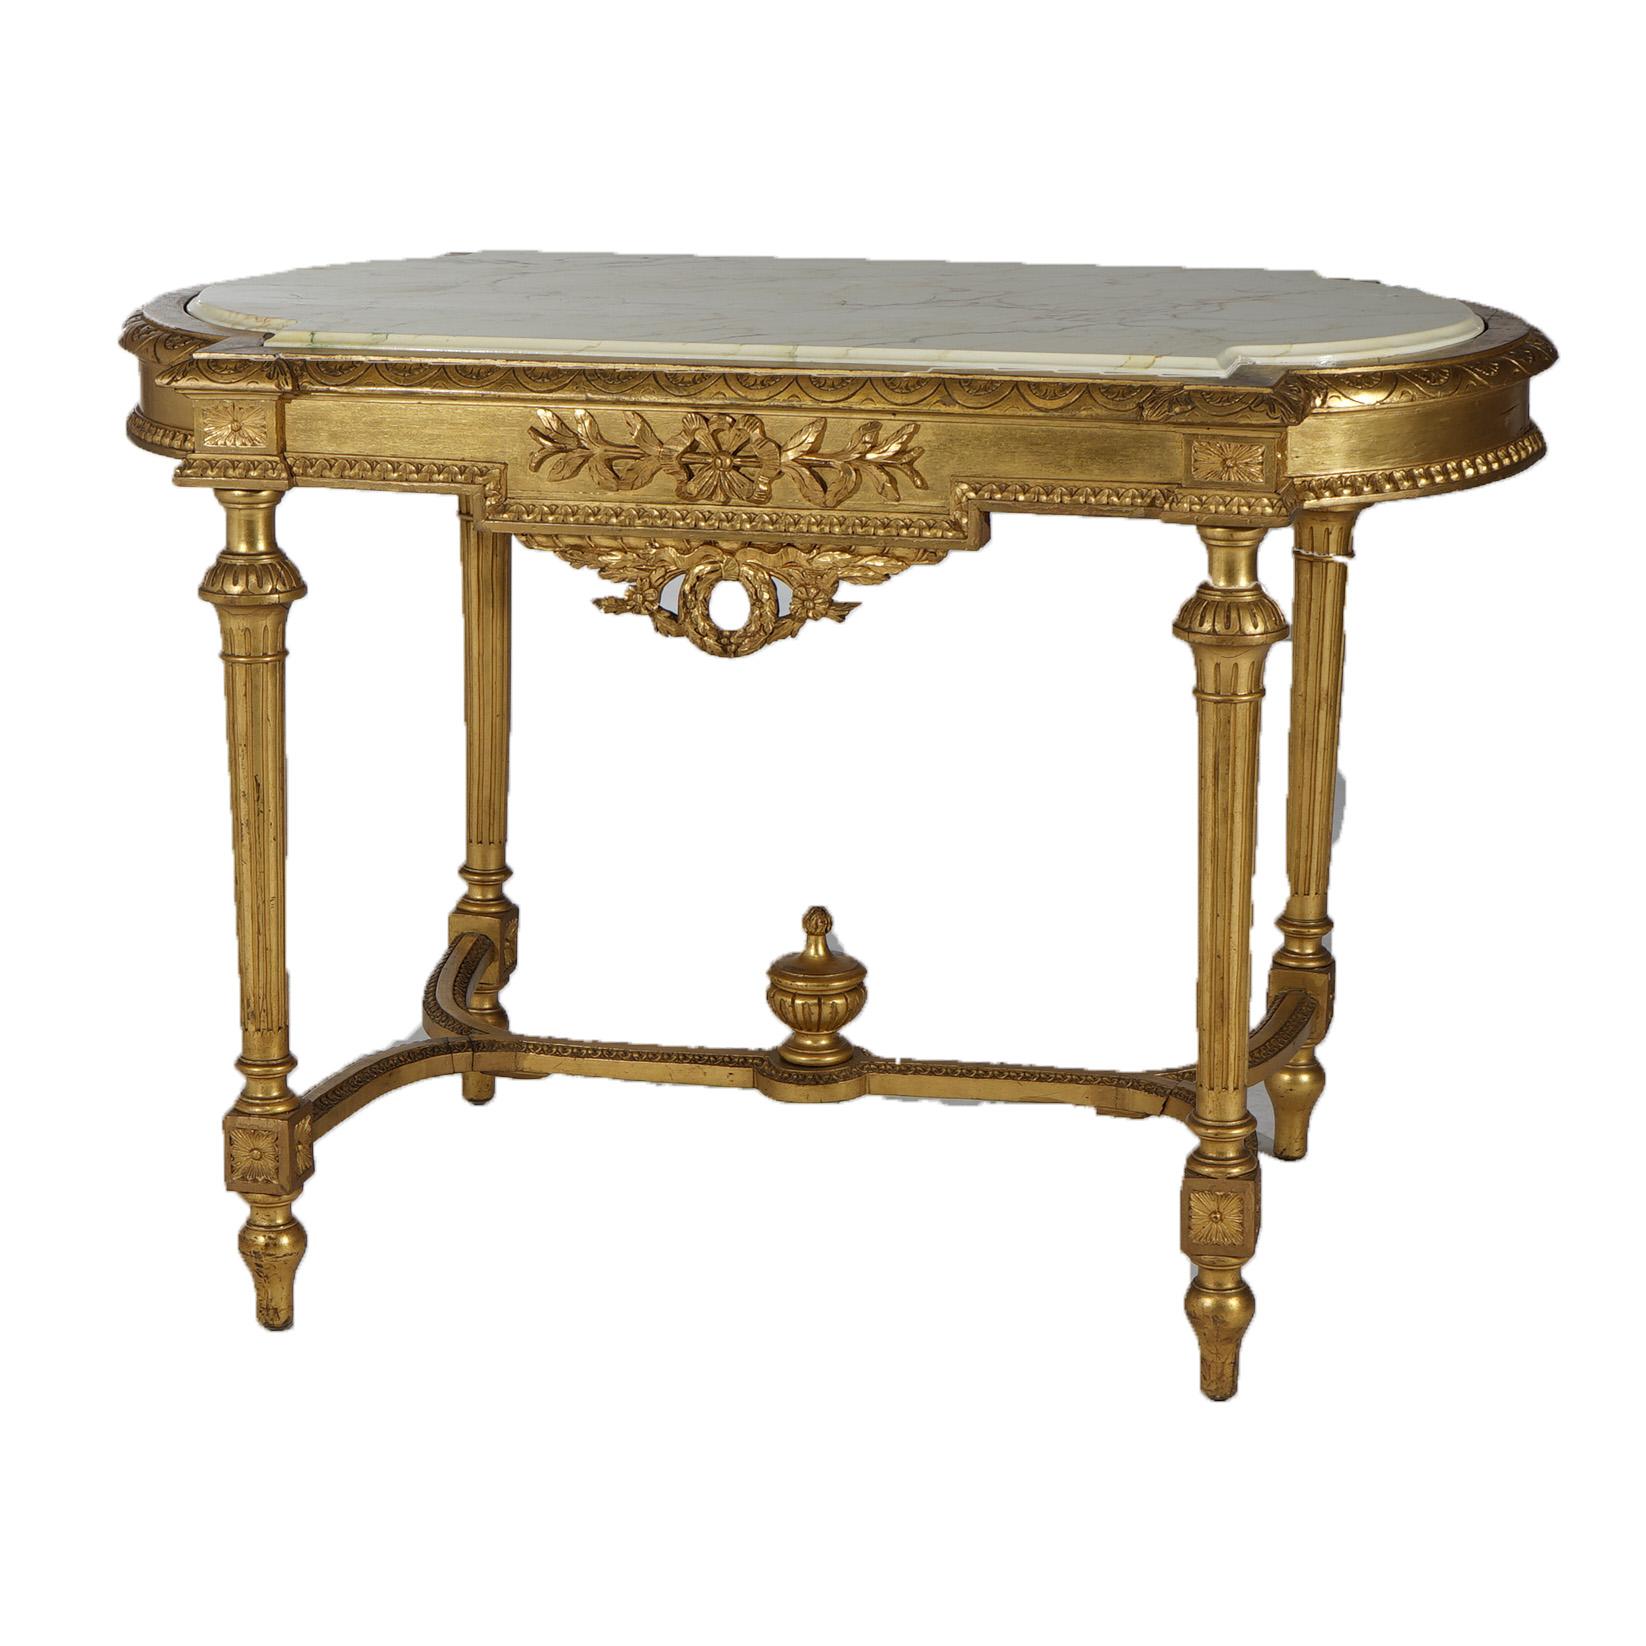 Antique French Louis XVI Style Giltwood Parlor Table with Faux Painted Top 19thC For Sale 14